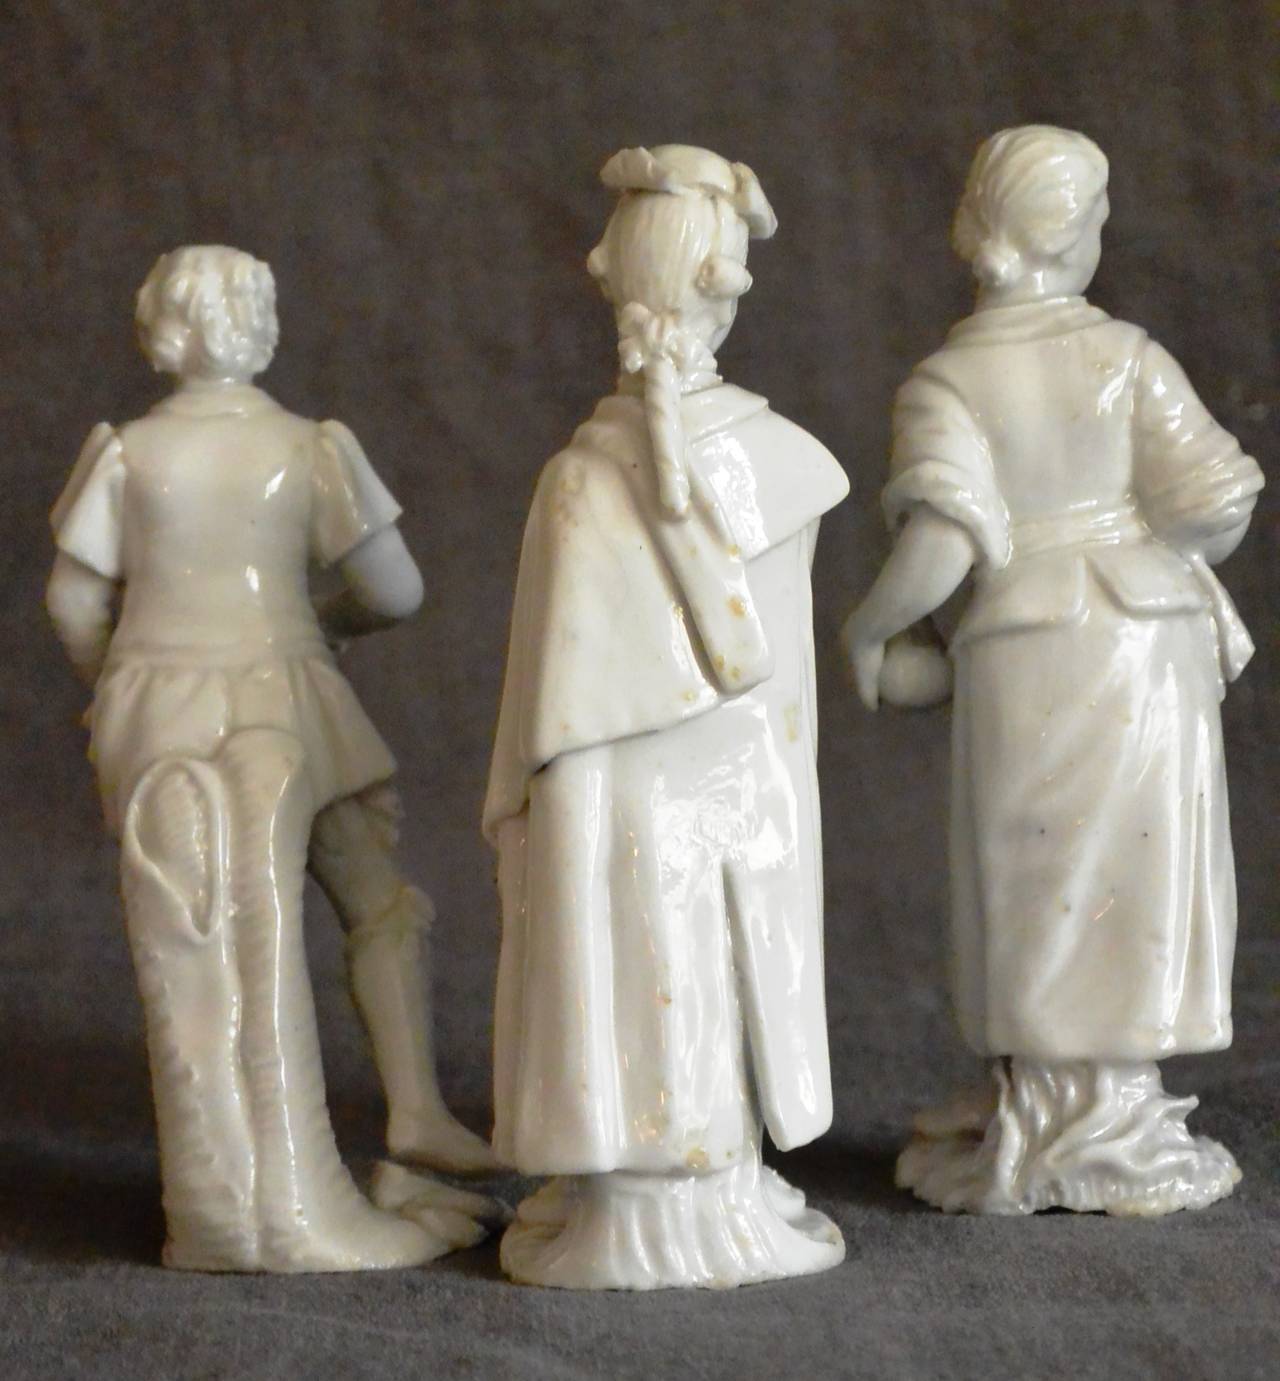 Set of three Cozzi white porcelain Venetian figures. Three small porcelain sculptures in the signature Cozzi glazed paste of a nobleman clutching a flower, a woman holding a carafe, and a young boy holding flowers, Italy, circa